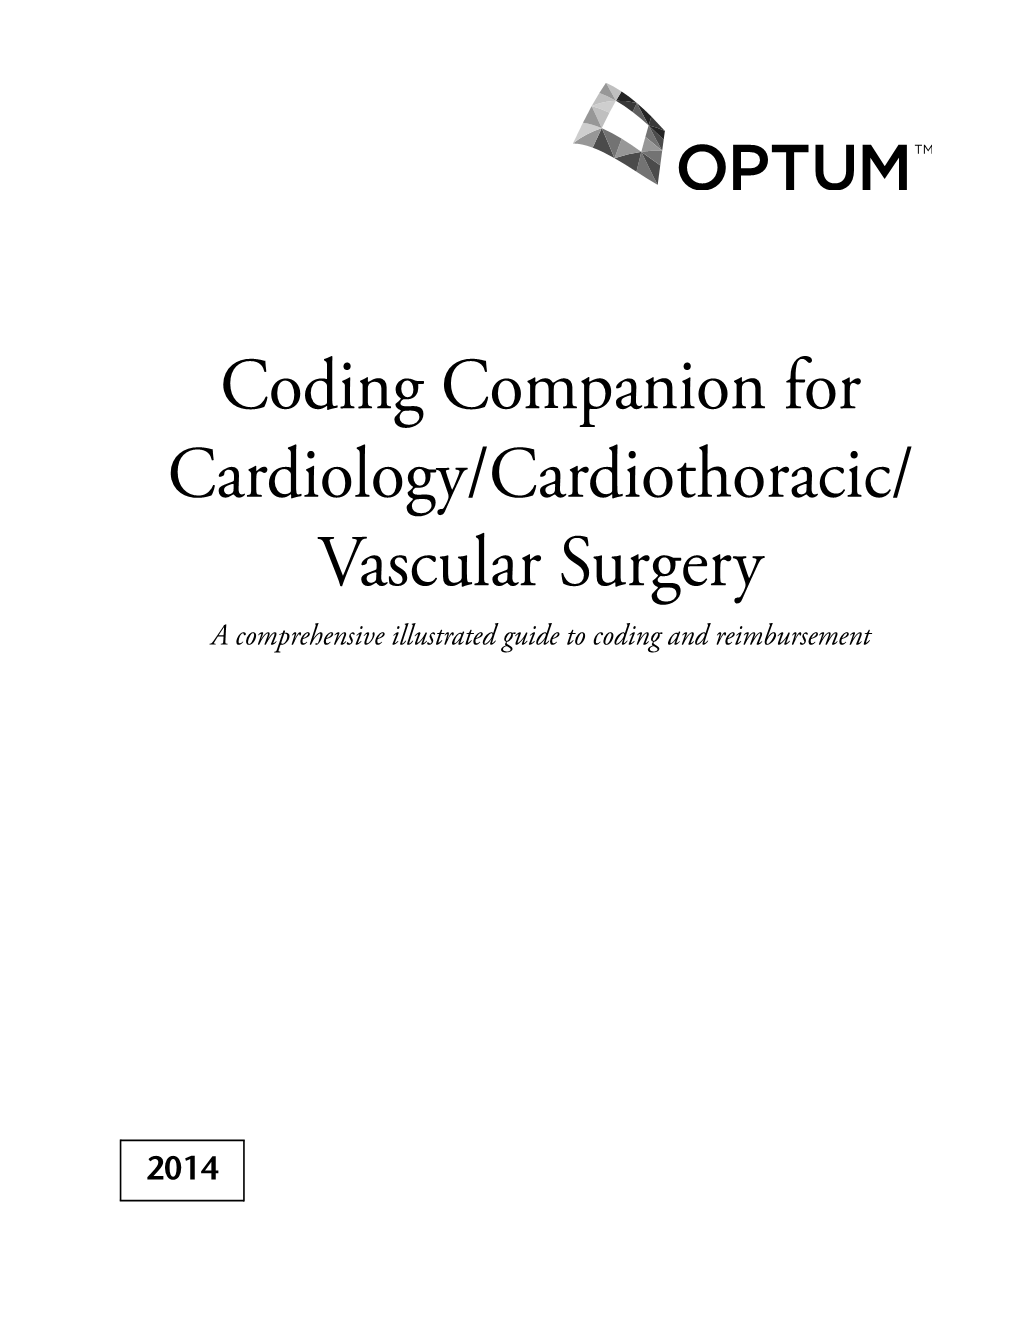 Vascular Surgery a Comprehensive Illustrated Guide to Coding and Reimbursement